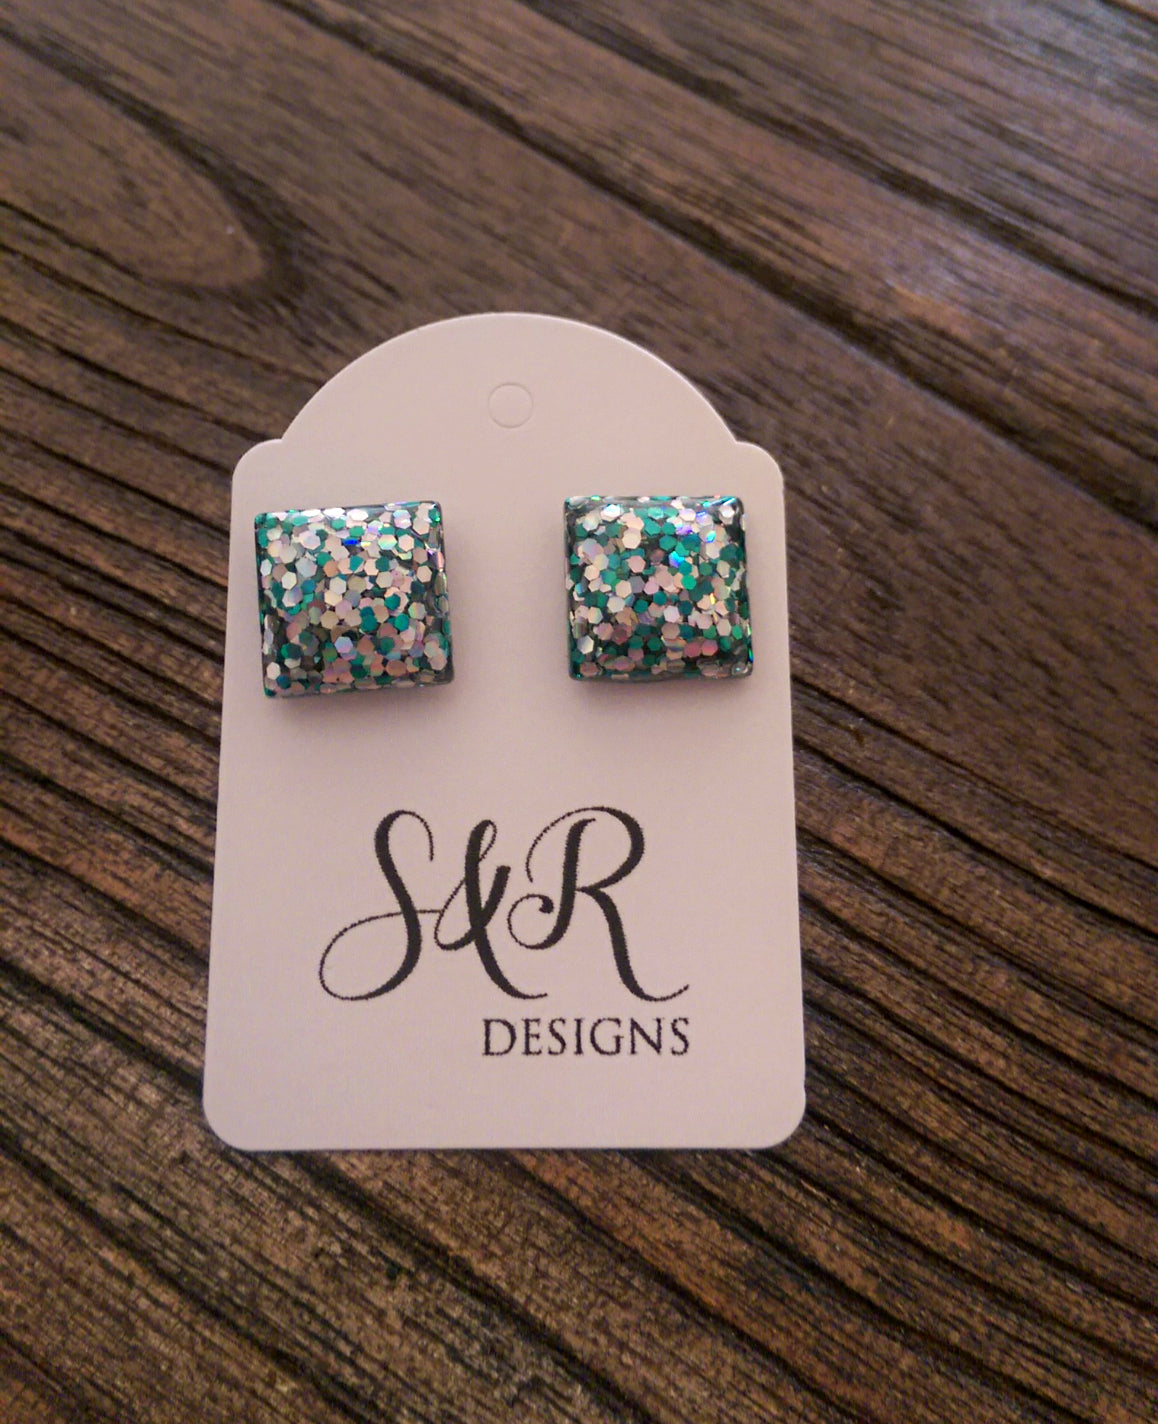 Holographic Silver Green Glitter Square Resin Stud Earrings, Stainless Steel Stud Earrings. 12mm - Silver and Resin Designs